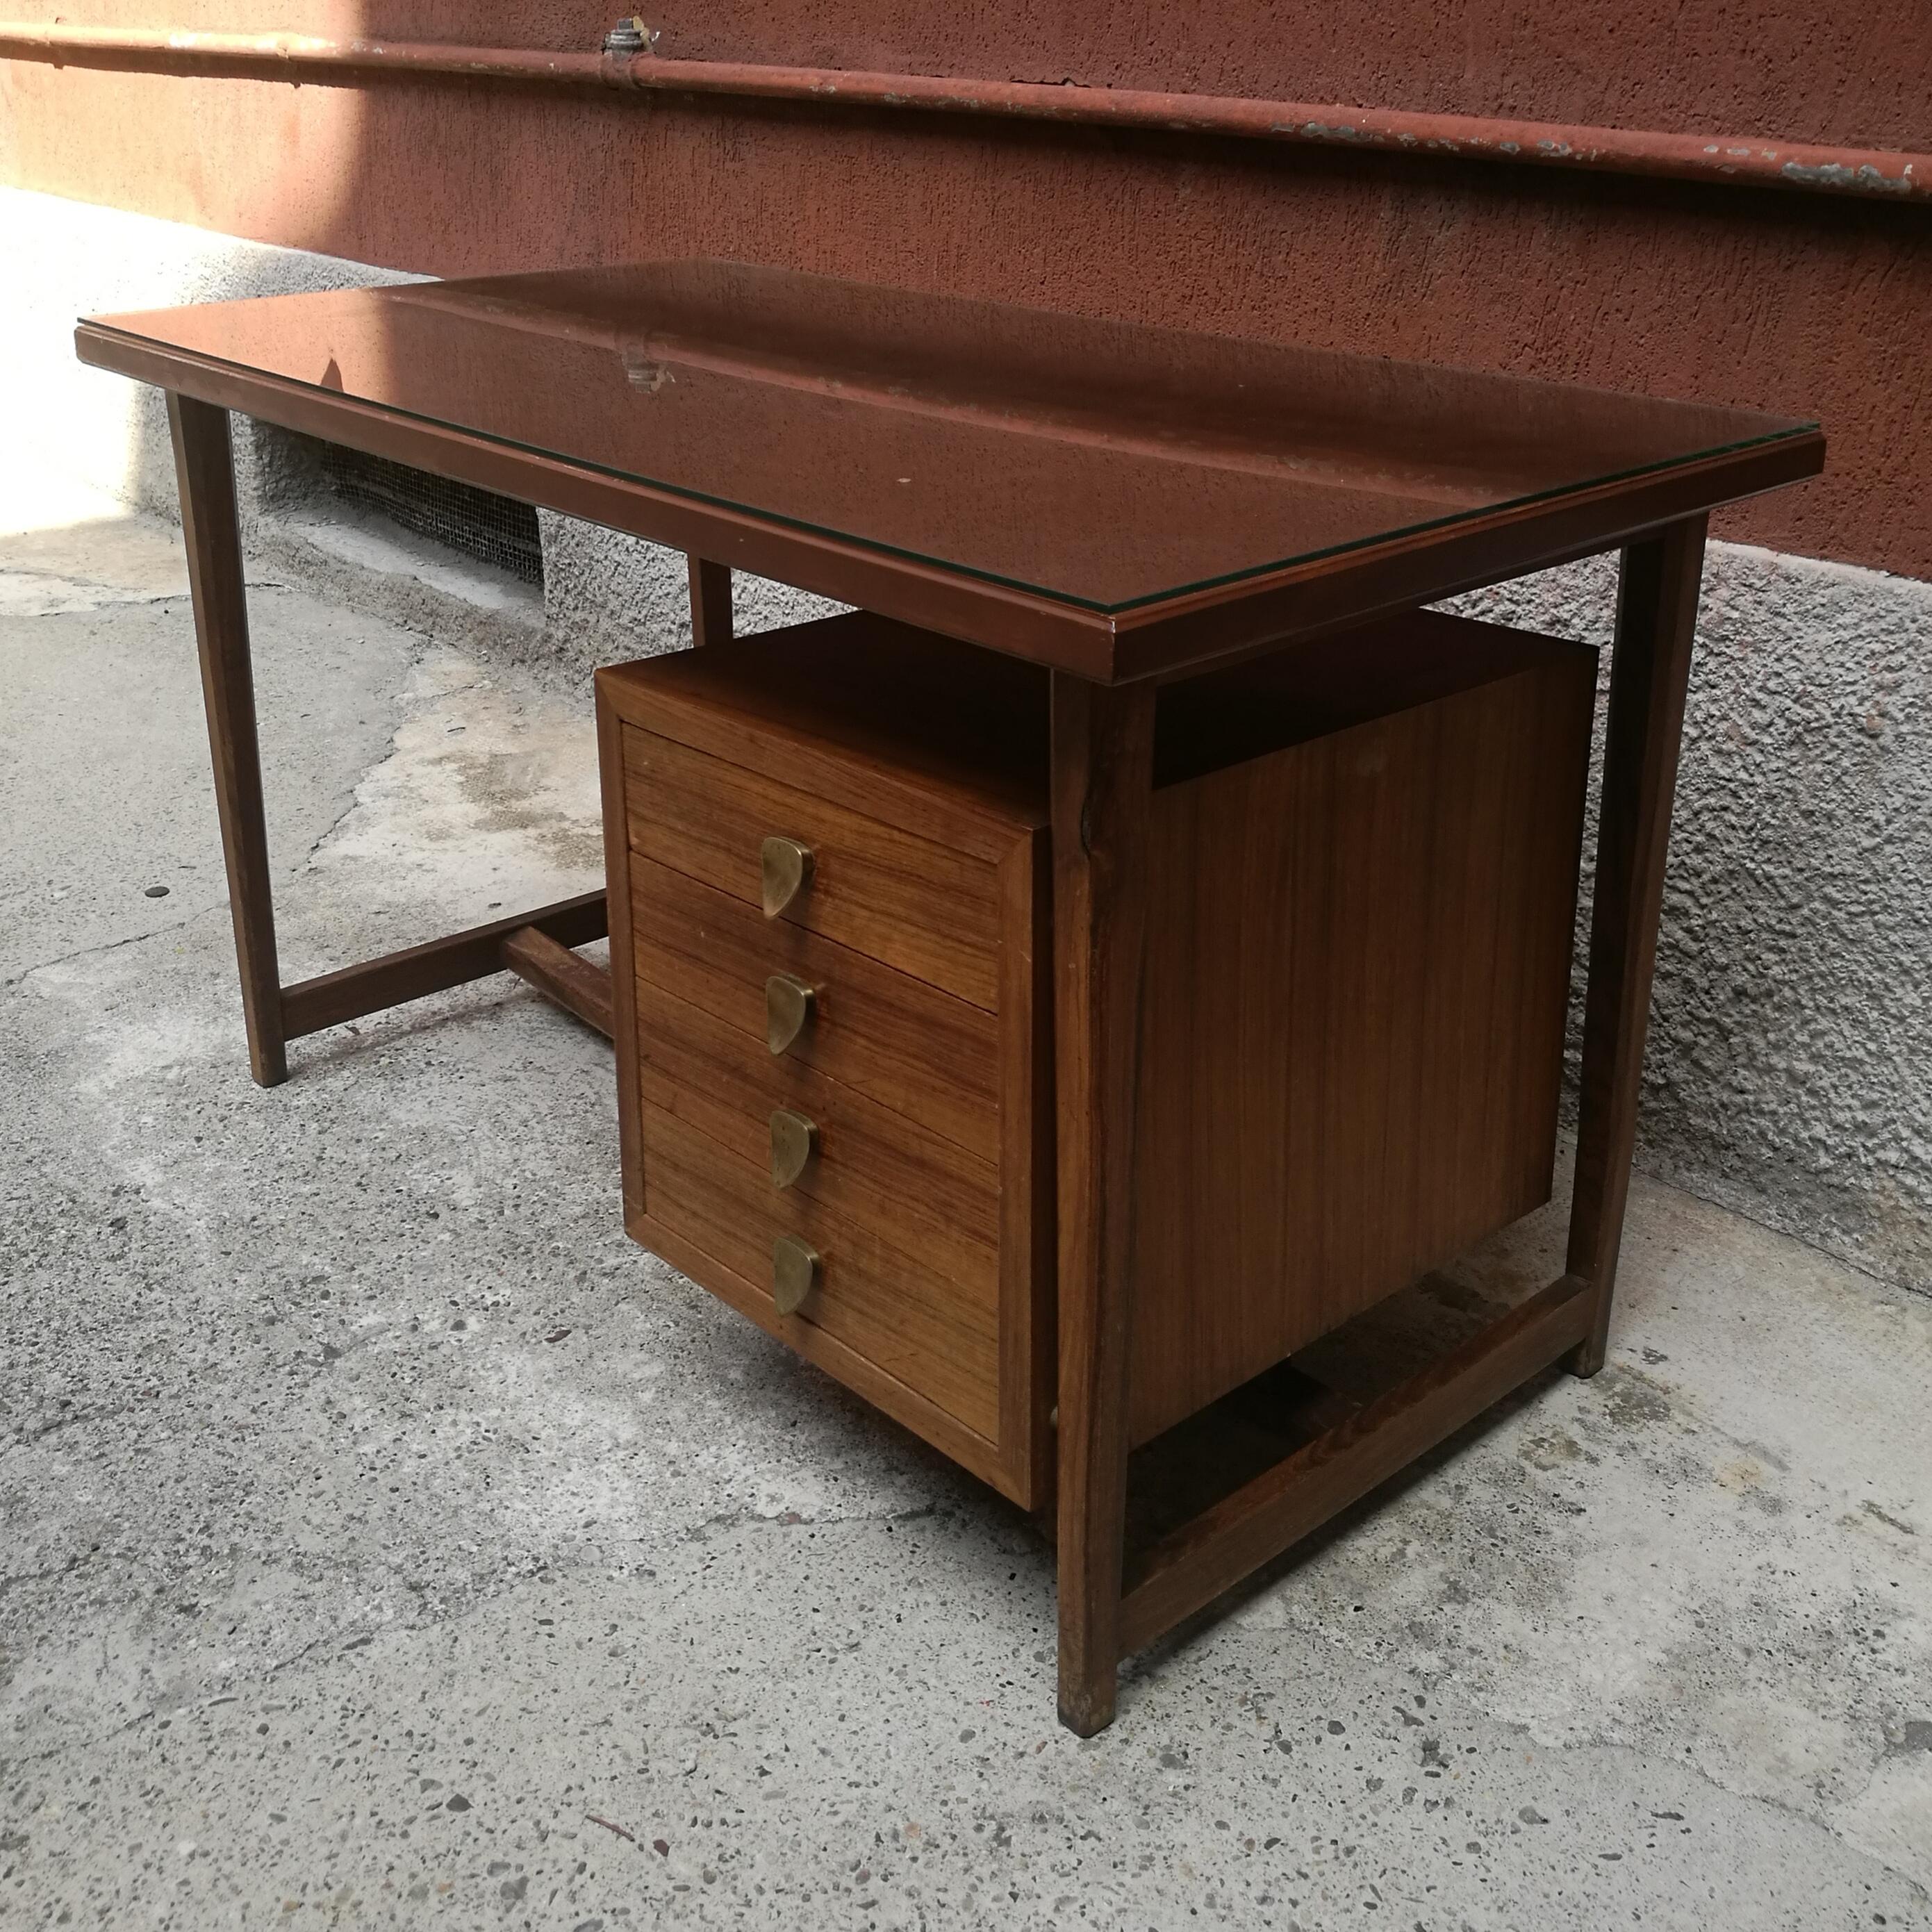 Midcentury Italian, wood and brass desk with glass top, 1960s
Desk with chest of drawers, shaped brass handles and leather top and transparent glass above
A very high quality and rare executive desk.